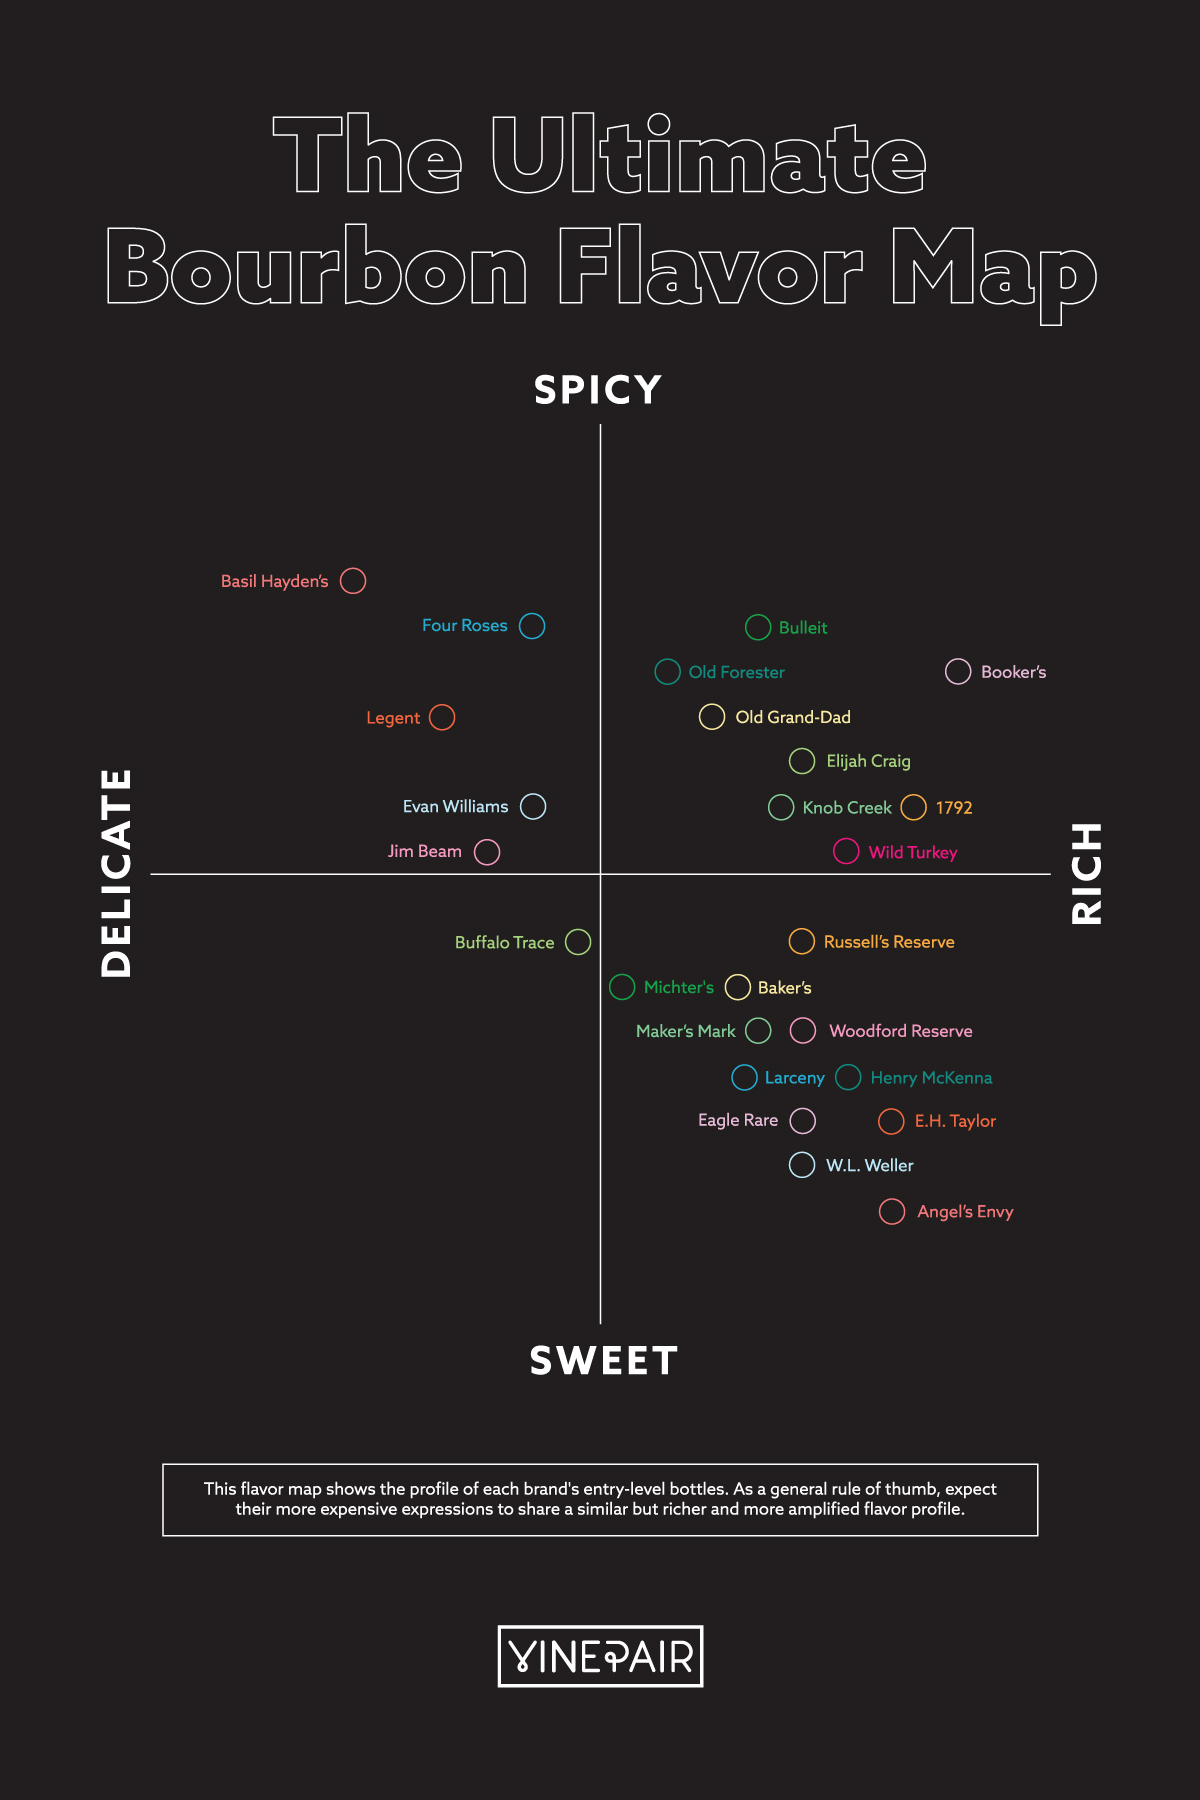 The Ultimate Bourbon Flavor Map [Infographic] Isaiah Rippin